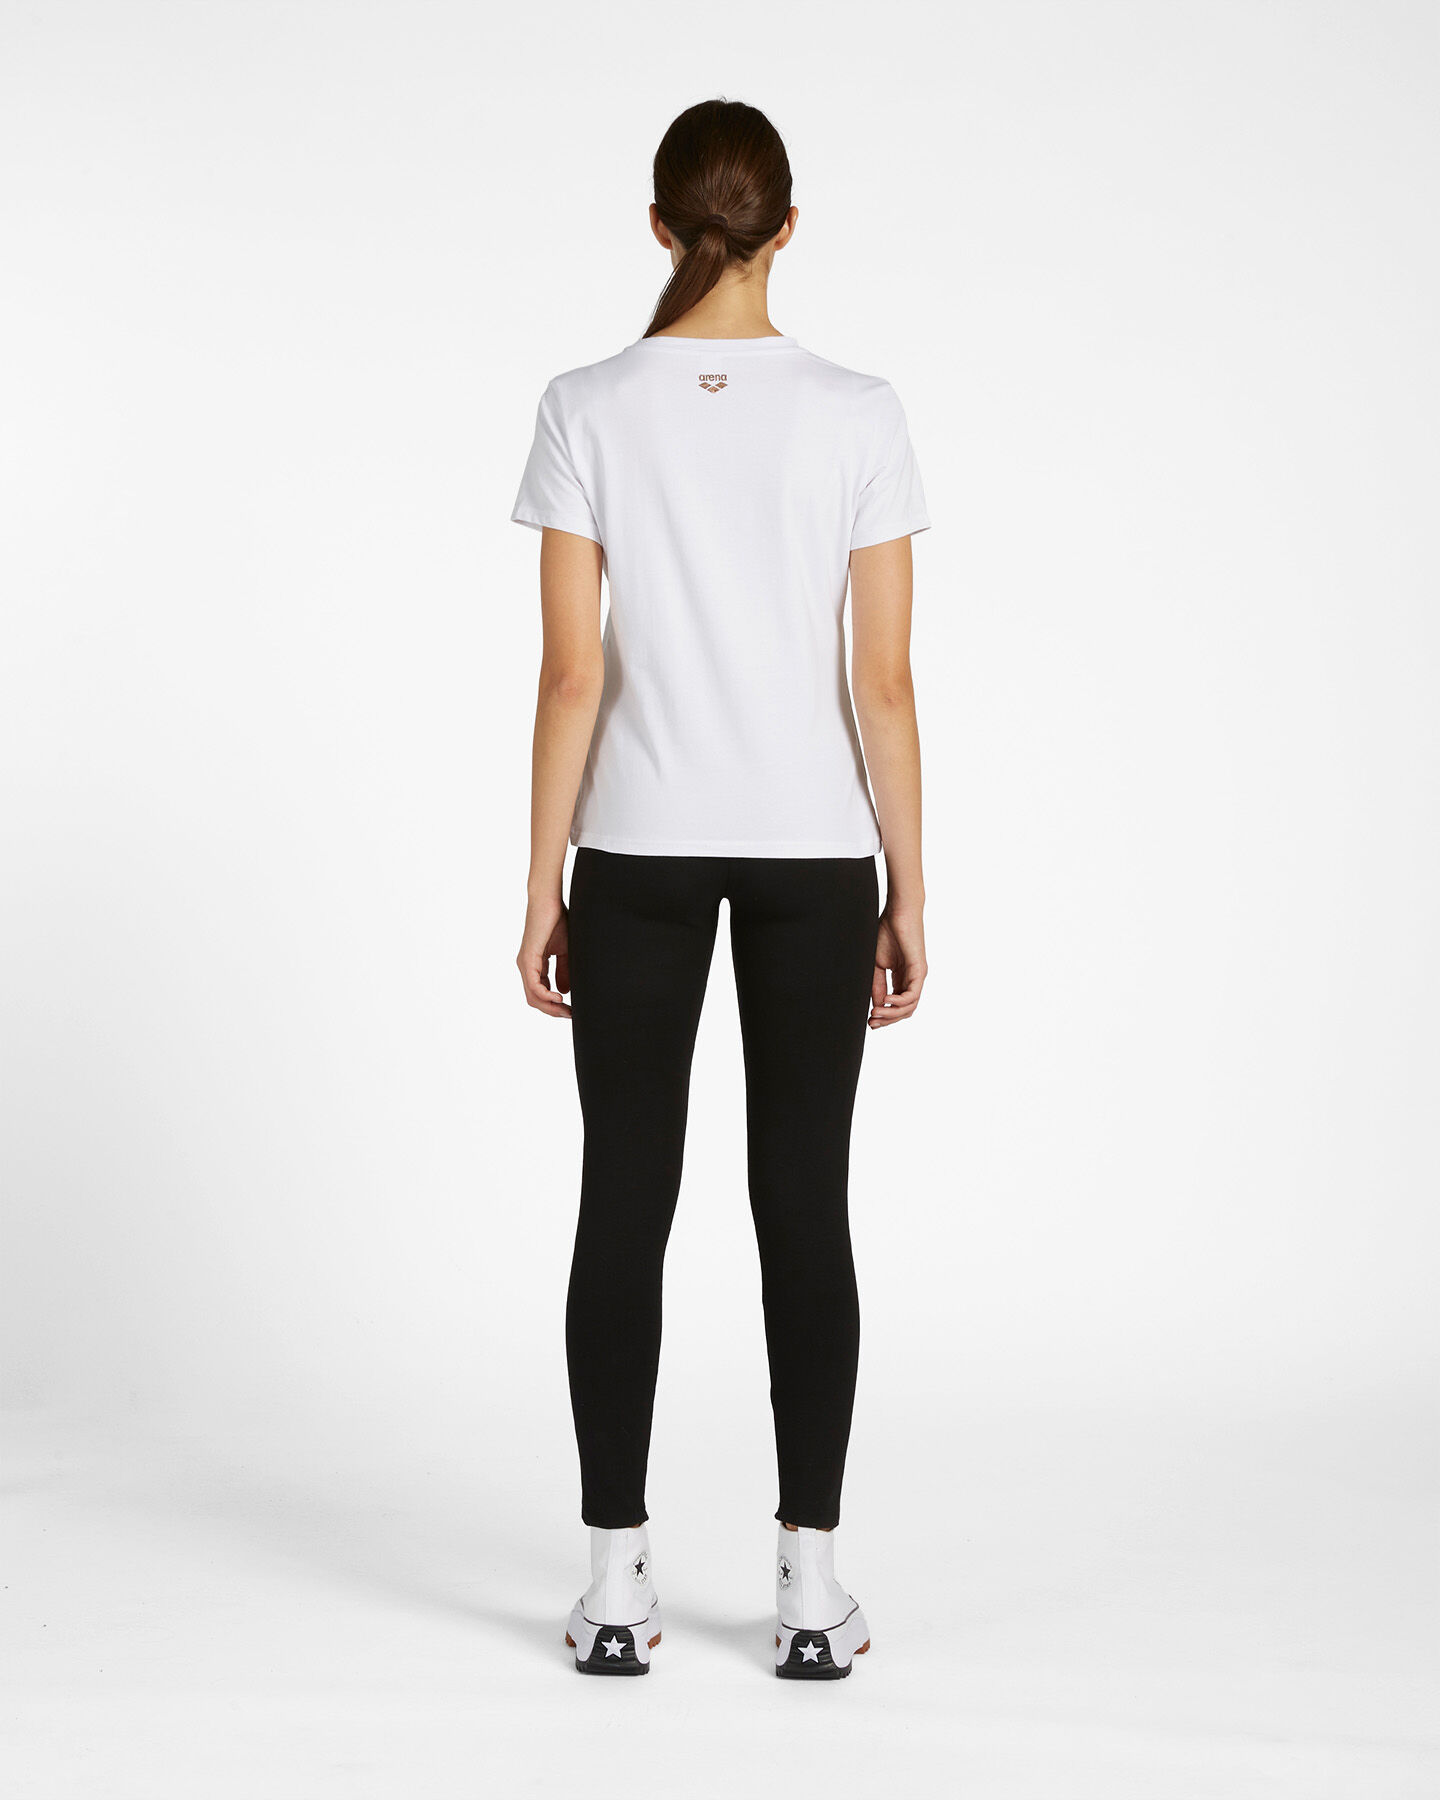  T-Shirt ARENA ATHLETIC W S4106244|050|S scatto 2